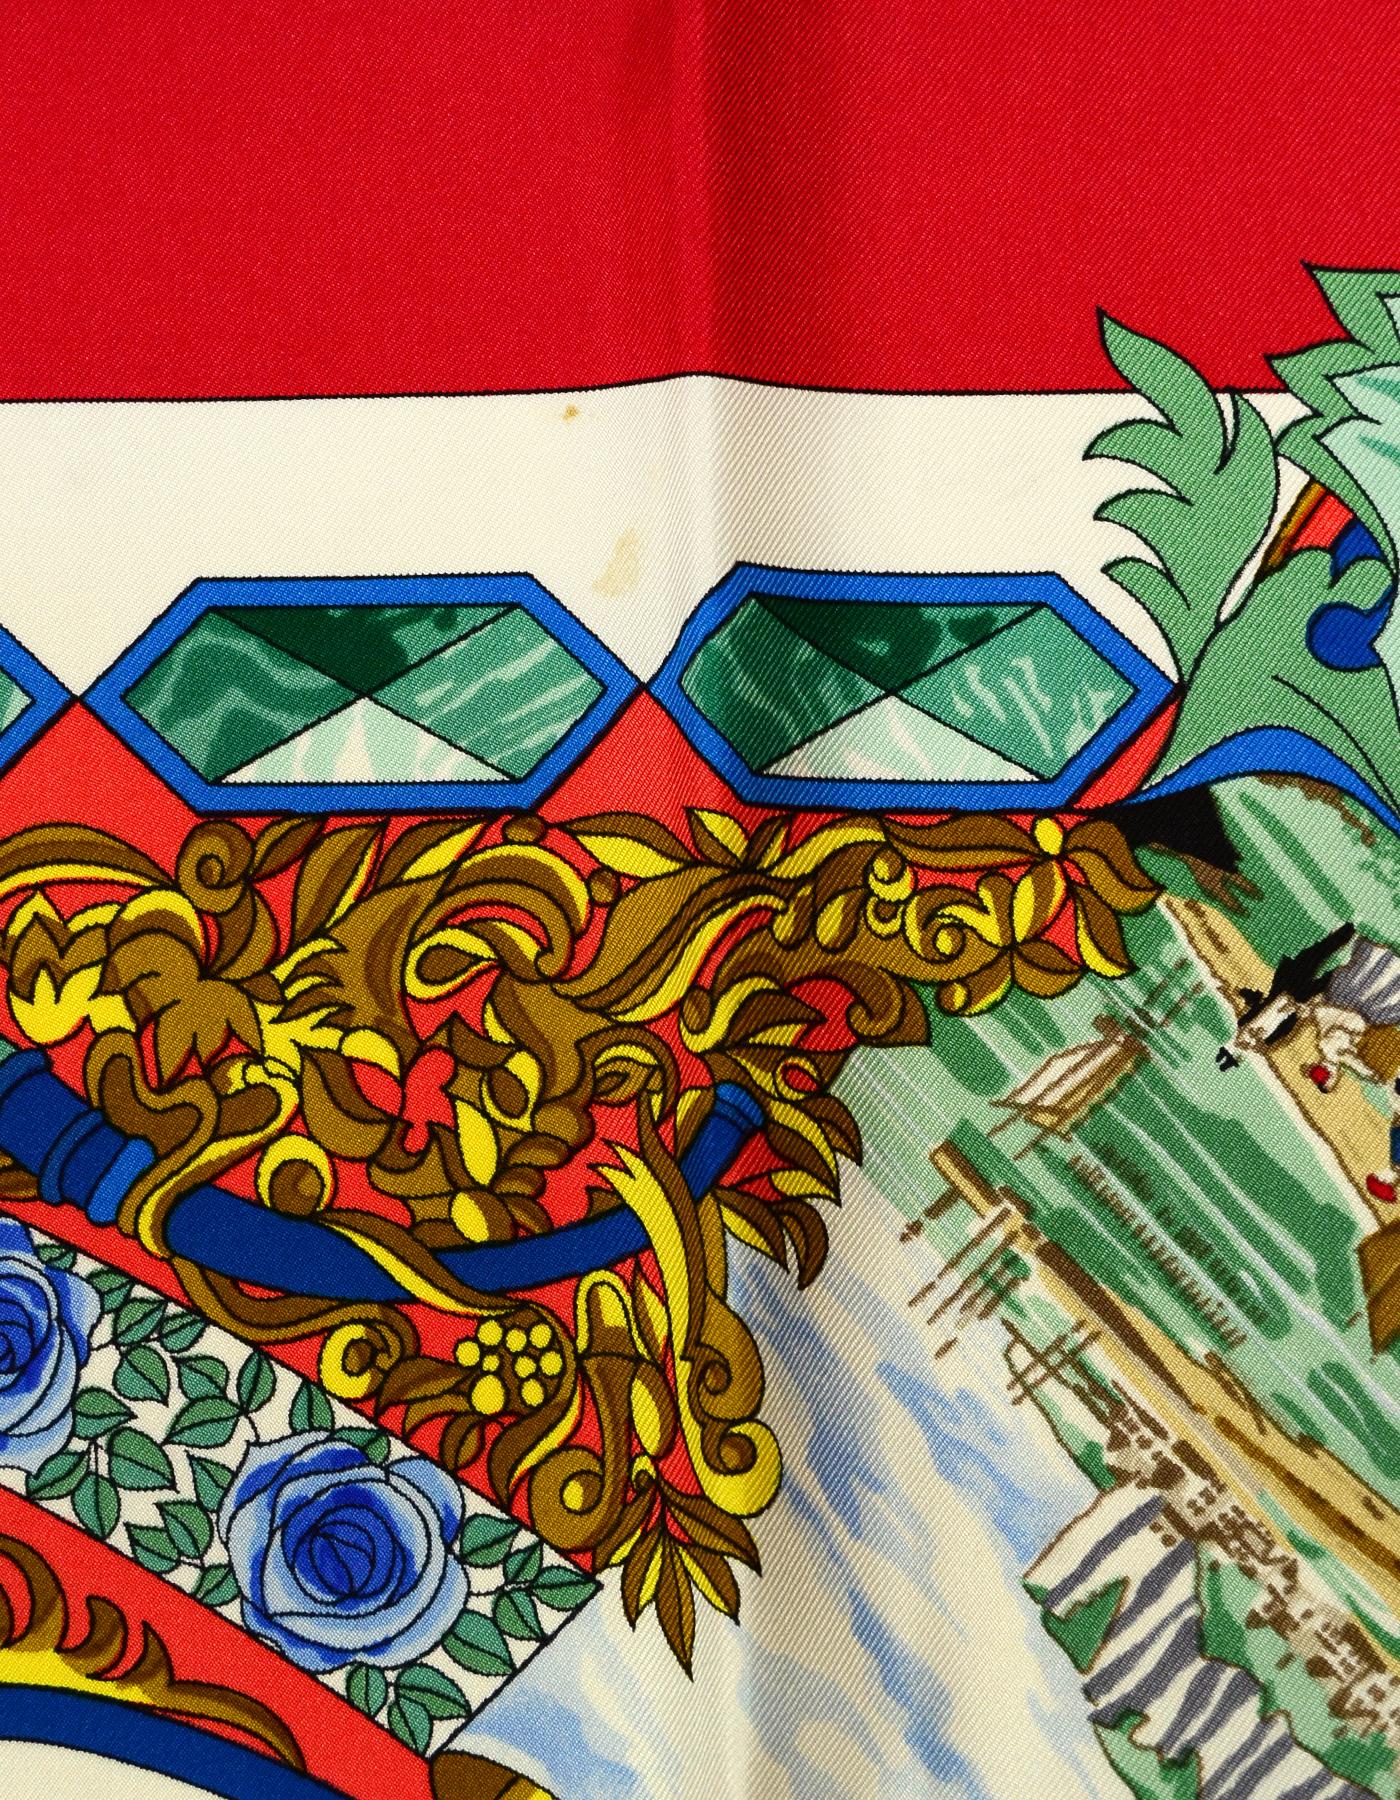 Women's Hermes L'Entente Cordiale 90cm Silk Scarf with Red Border by Loic Dubigeon